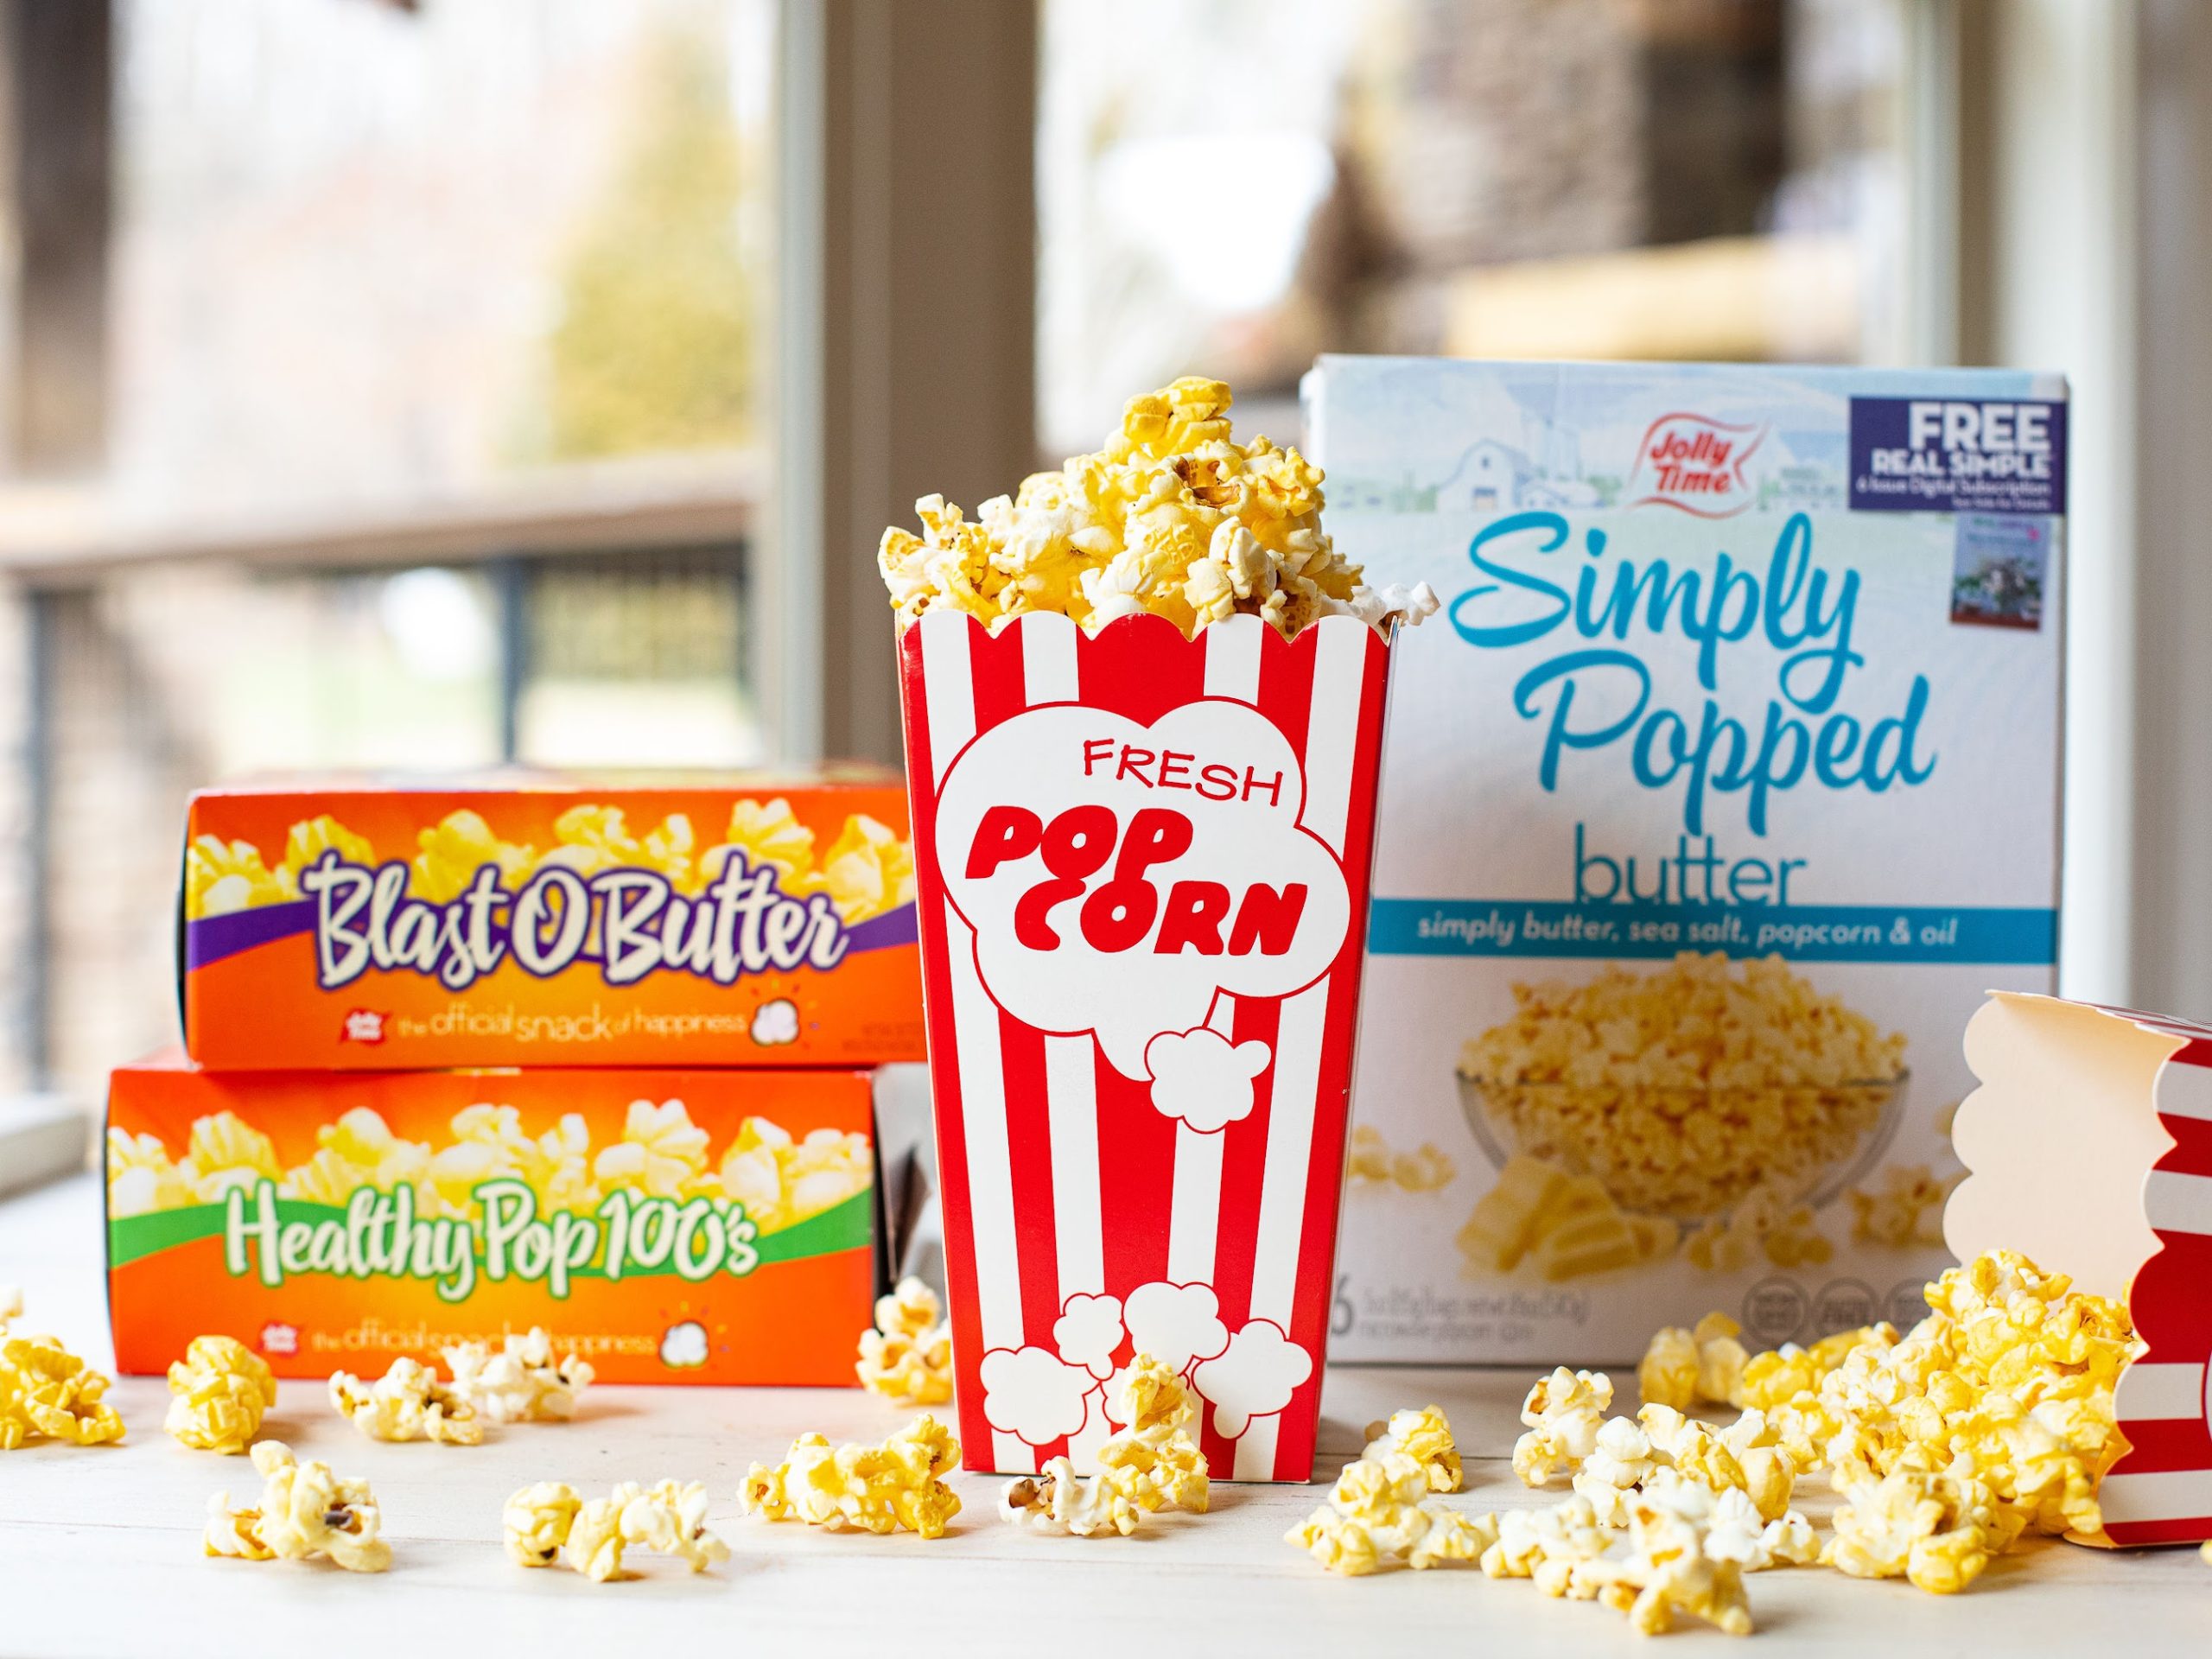 Stock Up On Jolly Time Pop Corn At Publix - $50 Publix Gift Card Winners Announced on I Heart Publix